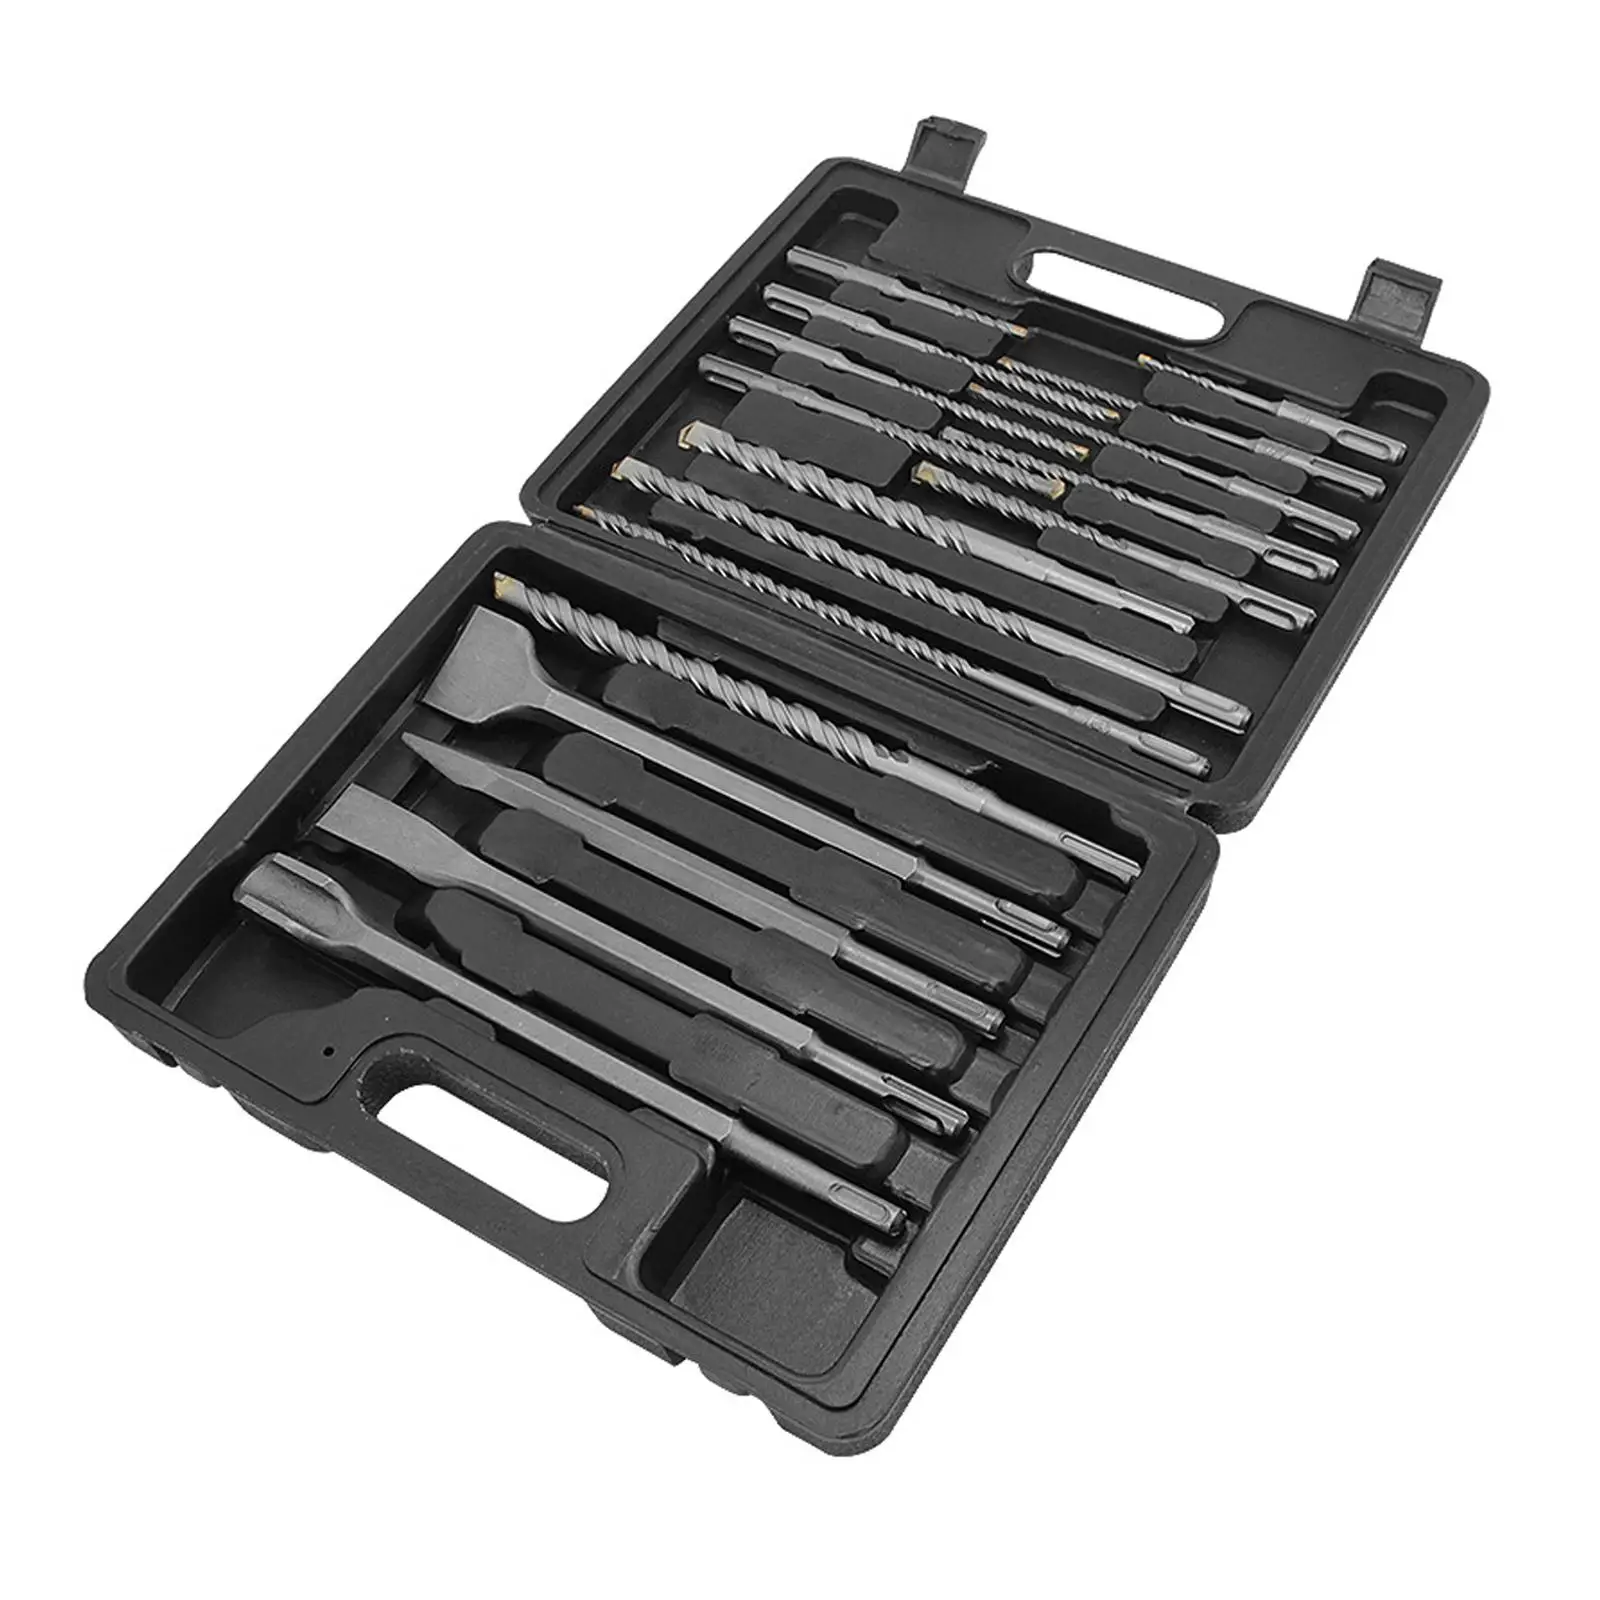 17 Pieces Round Shank Masonry Drill Bit Set Woodworking Tool Cutter Tools Hammer Drill Bit for Tile Porcelain Marble Cement Wall